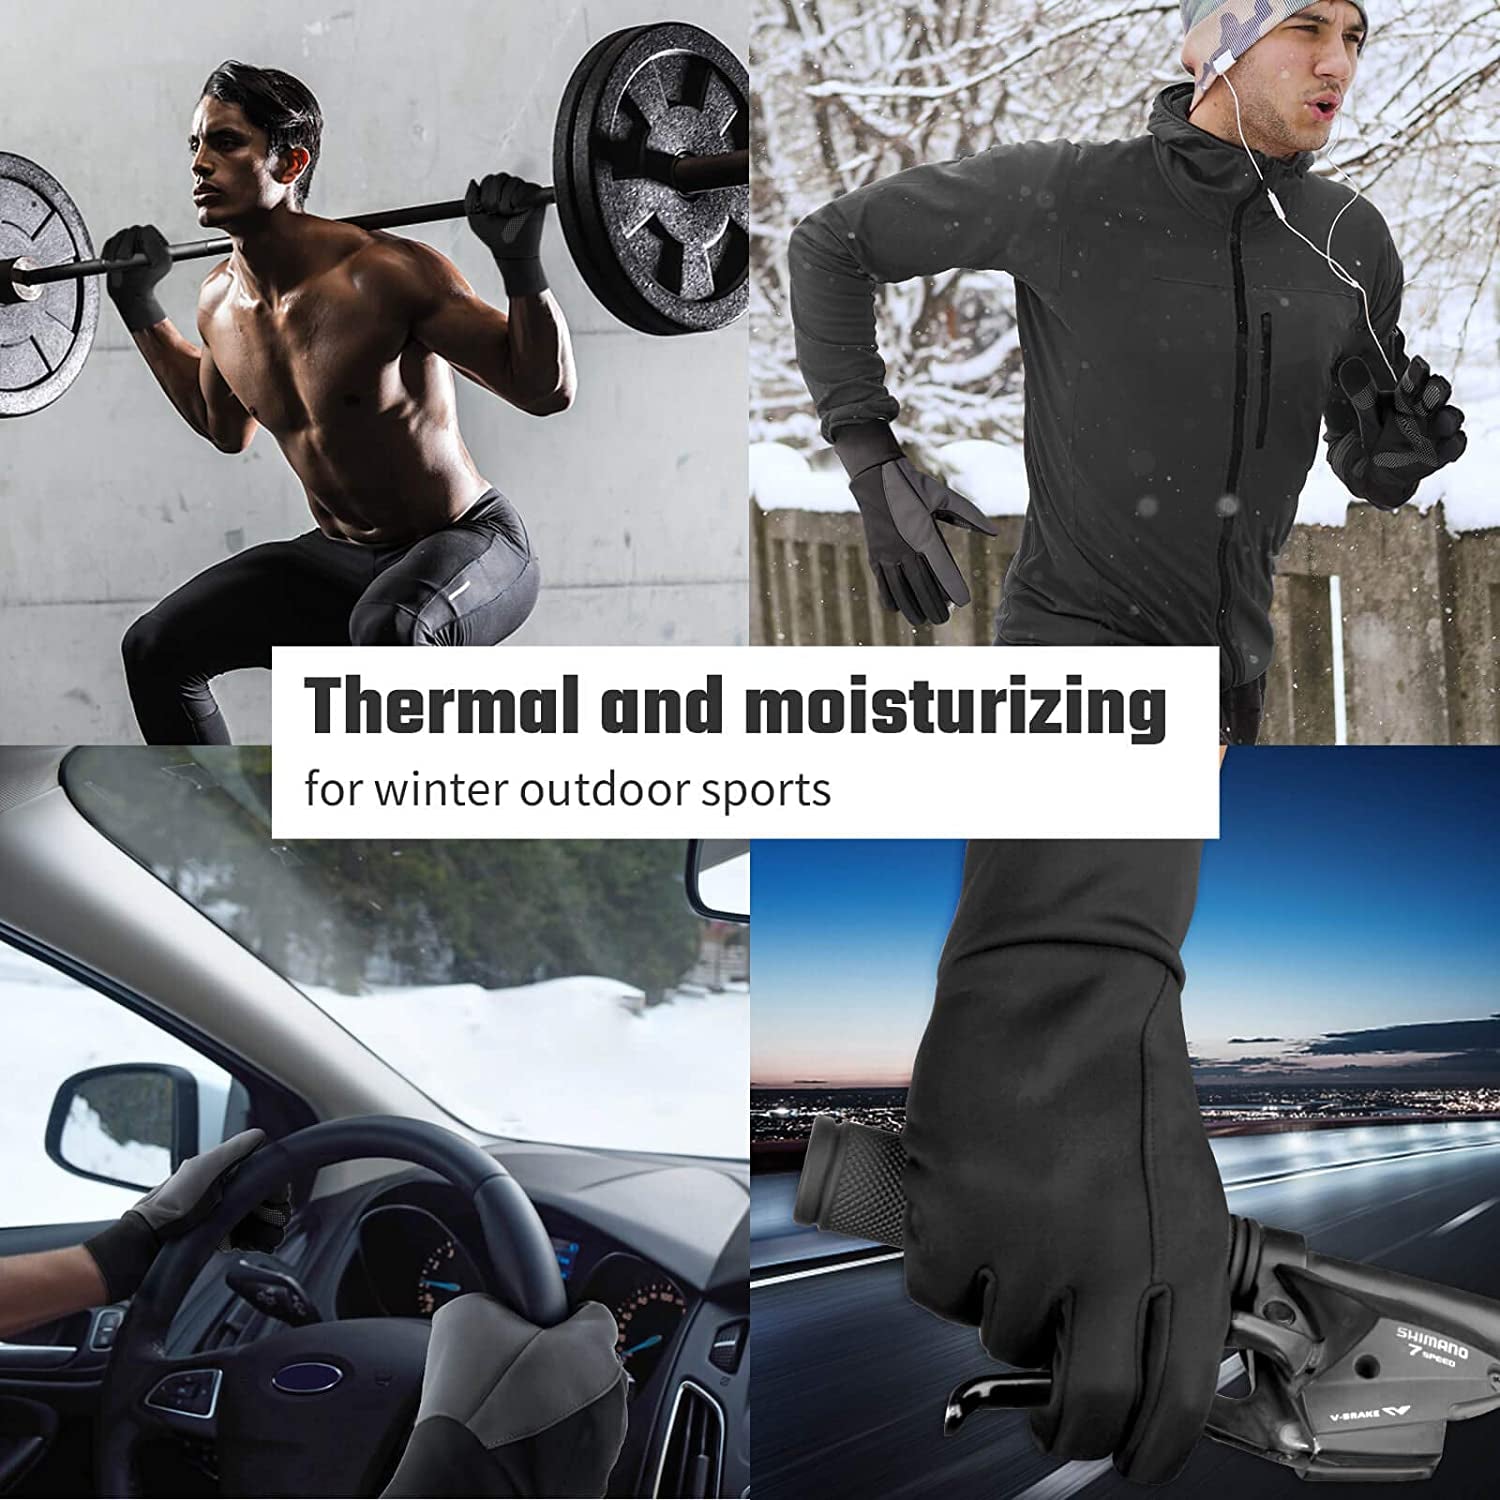 Winter Gloves Touch Screen Water Resistant and Thermal